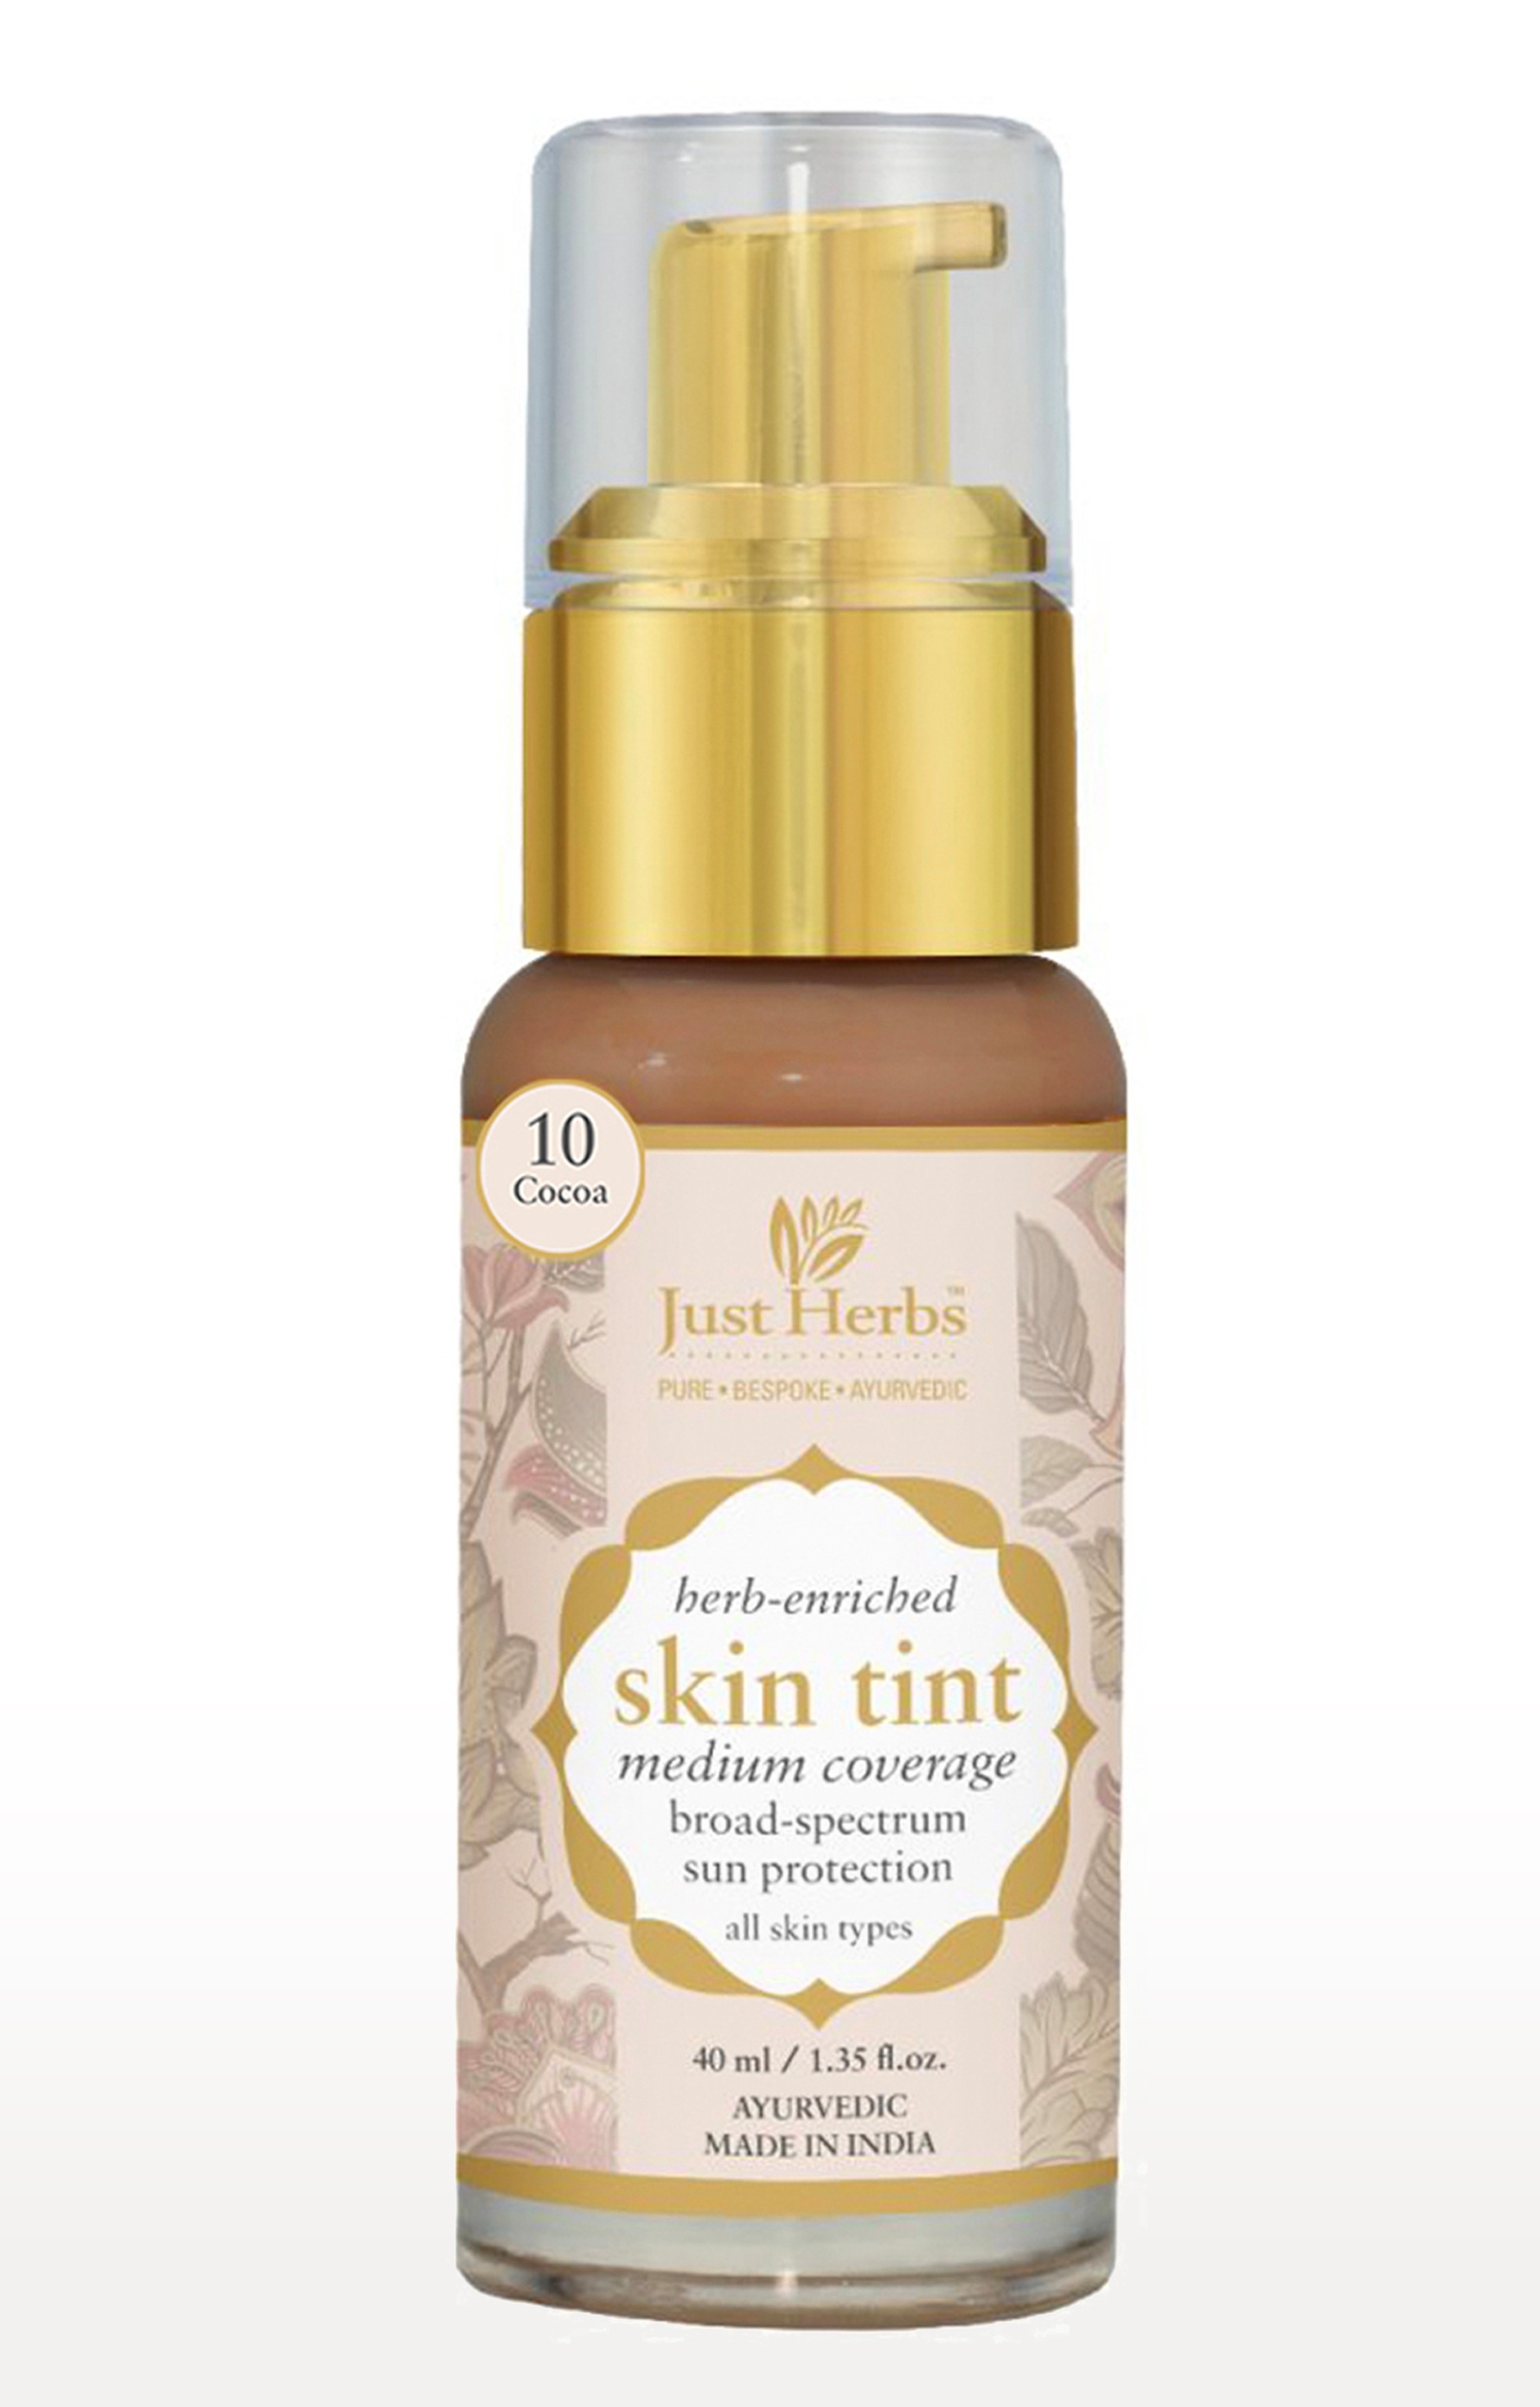 Just Herbs | Just Herbs skin tint - 10 Cocoa